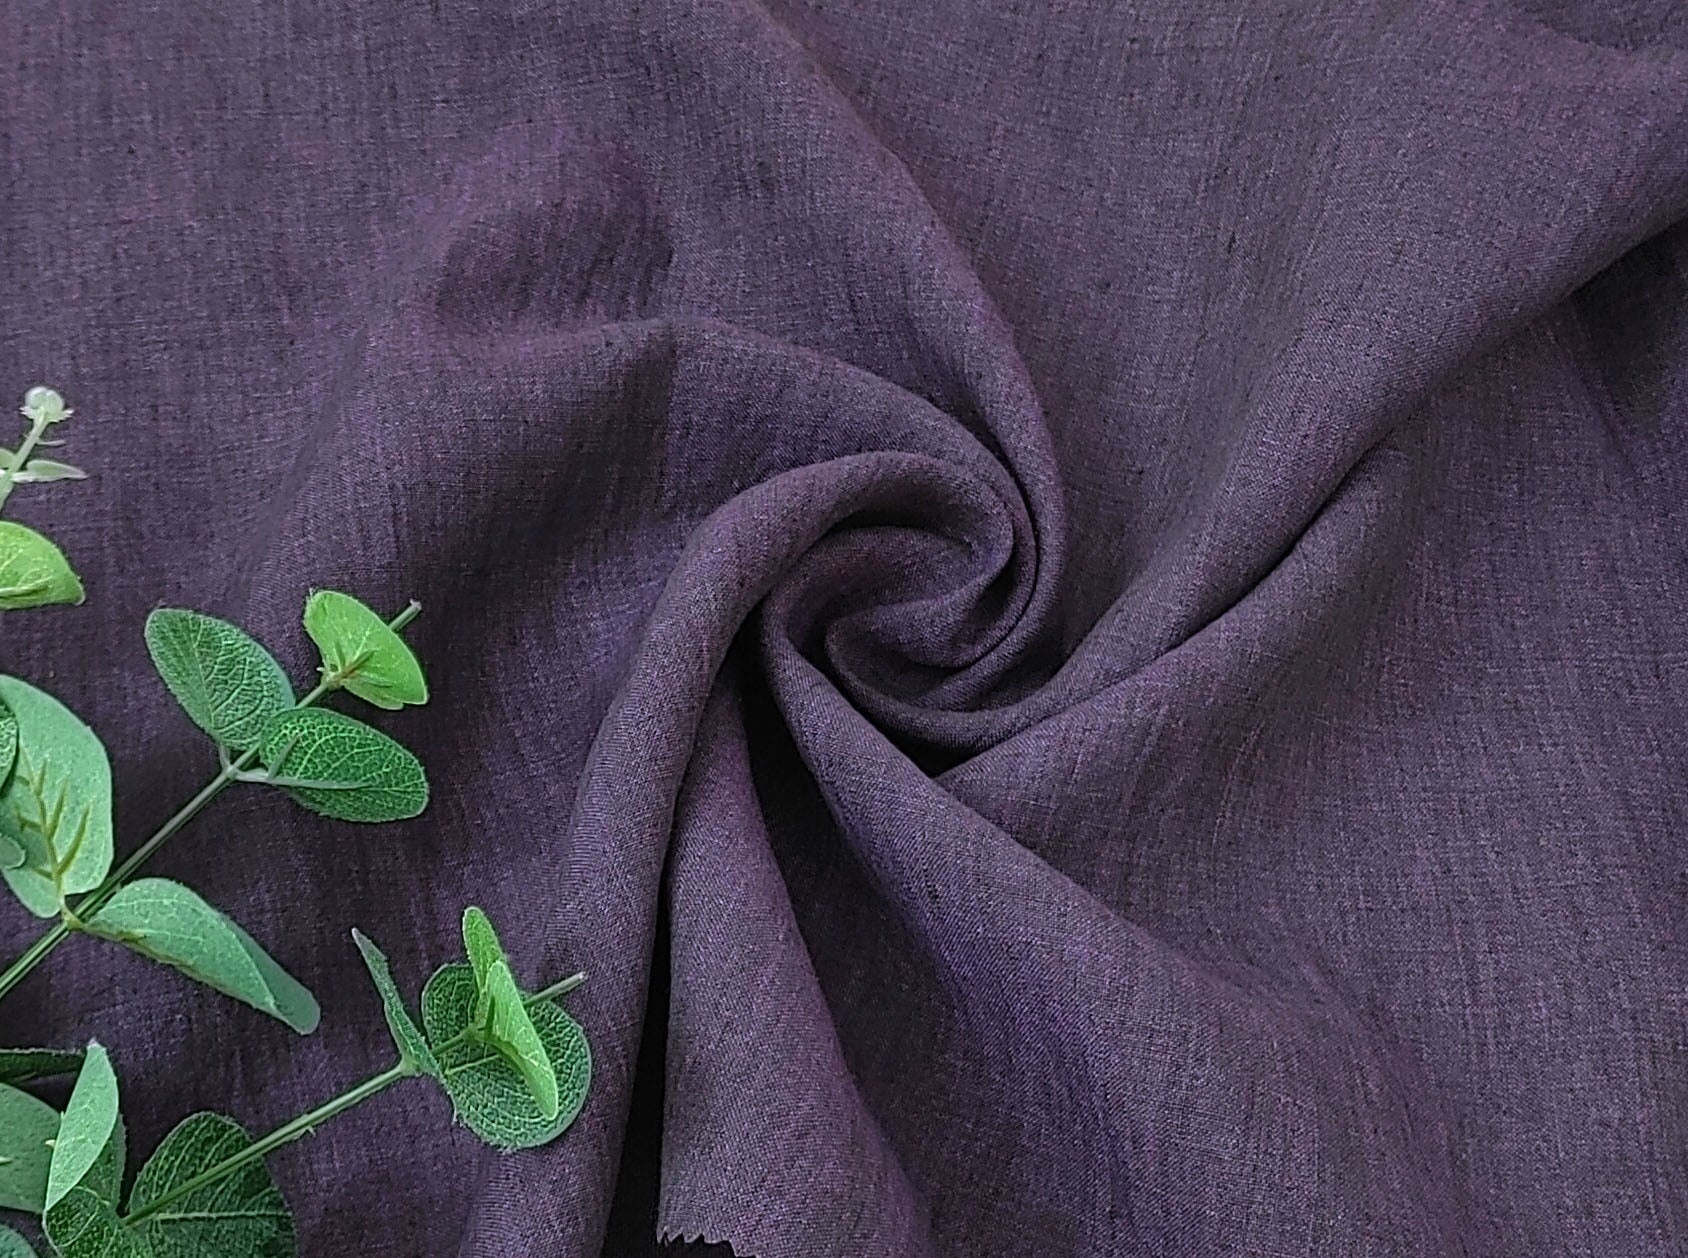 100% Linen Fabric: Delave High-Twisted Linen 14s, Medium Weight, New for 2024, 7712 7713 7682 - The Linen Lab - Violet